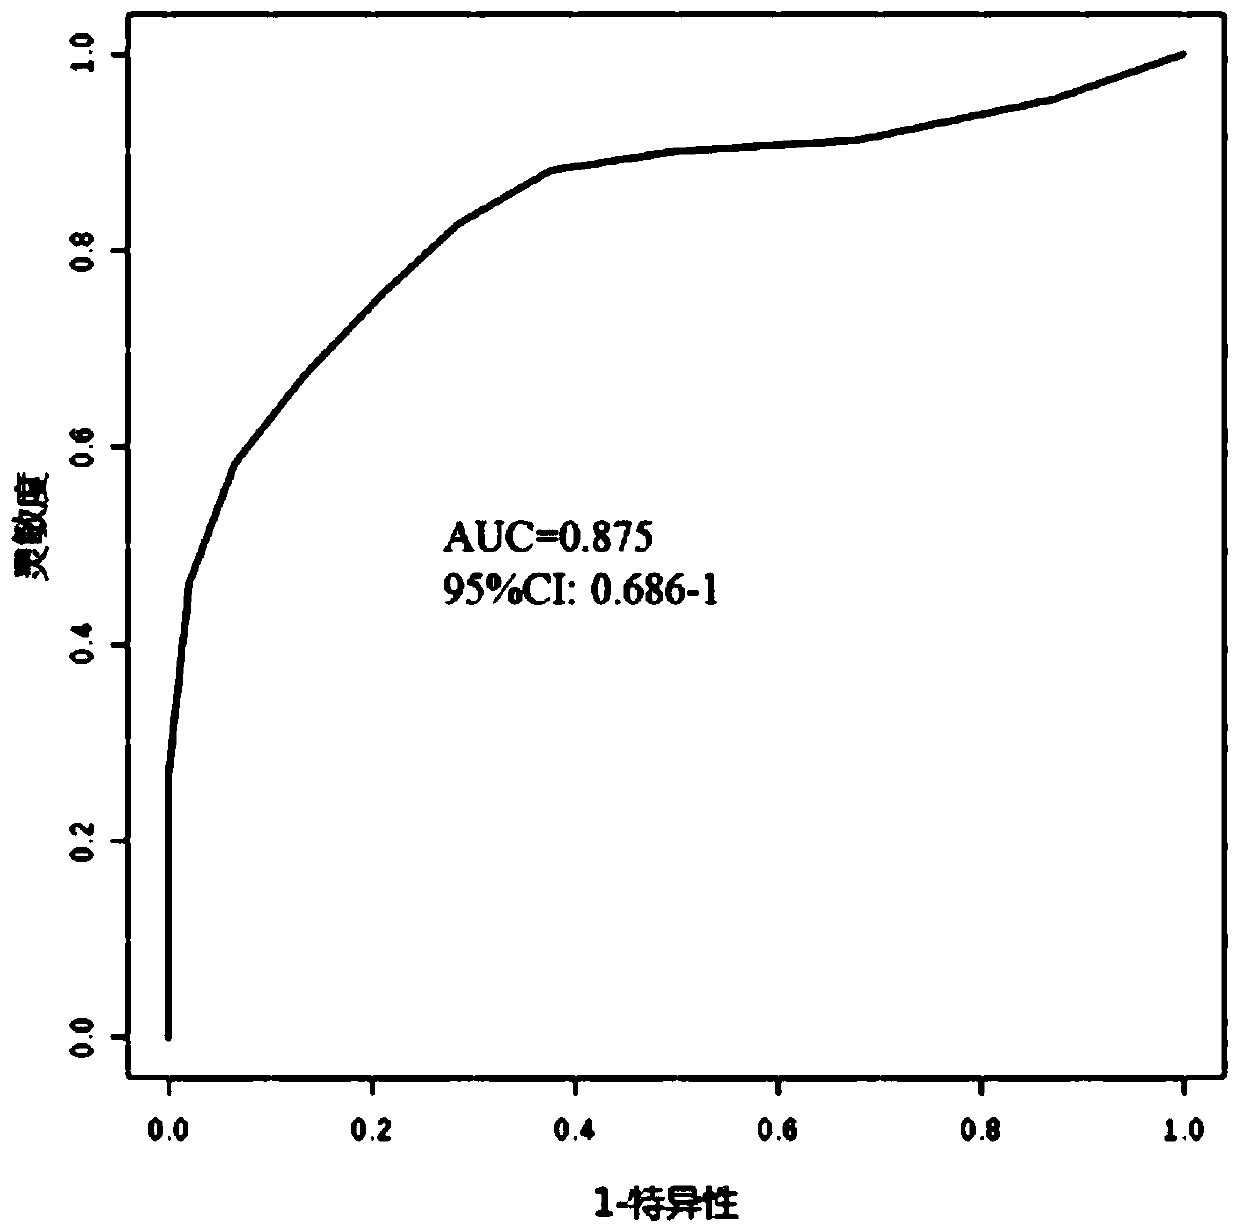 Protein marker for sicca syndrome in saliva and application of protein marker